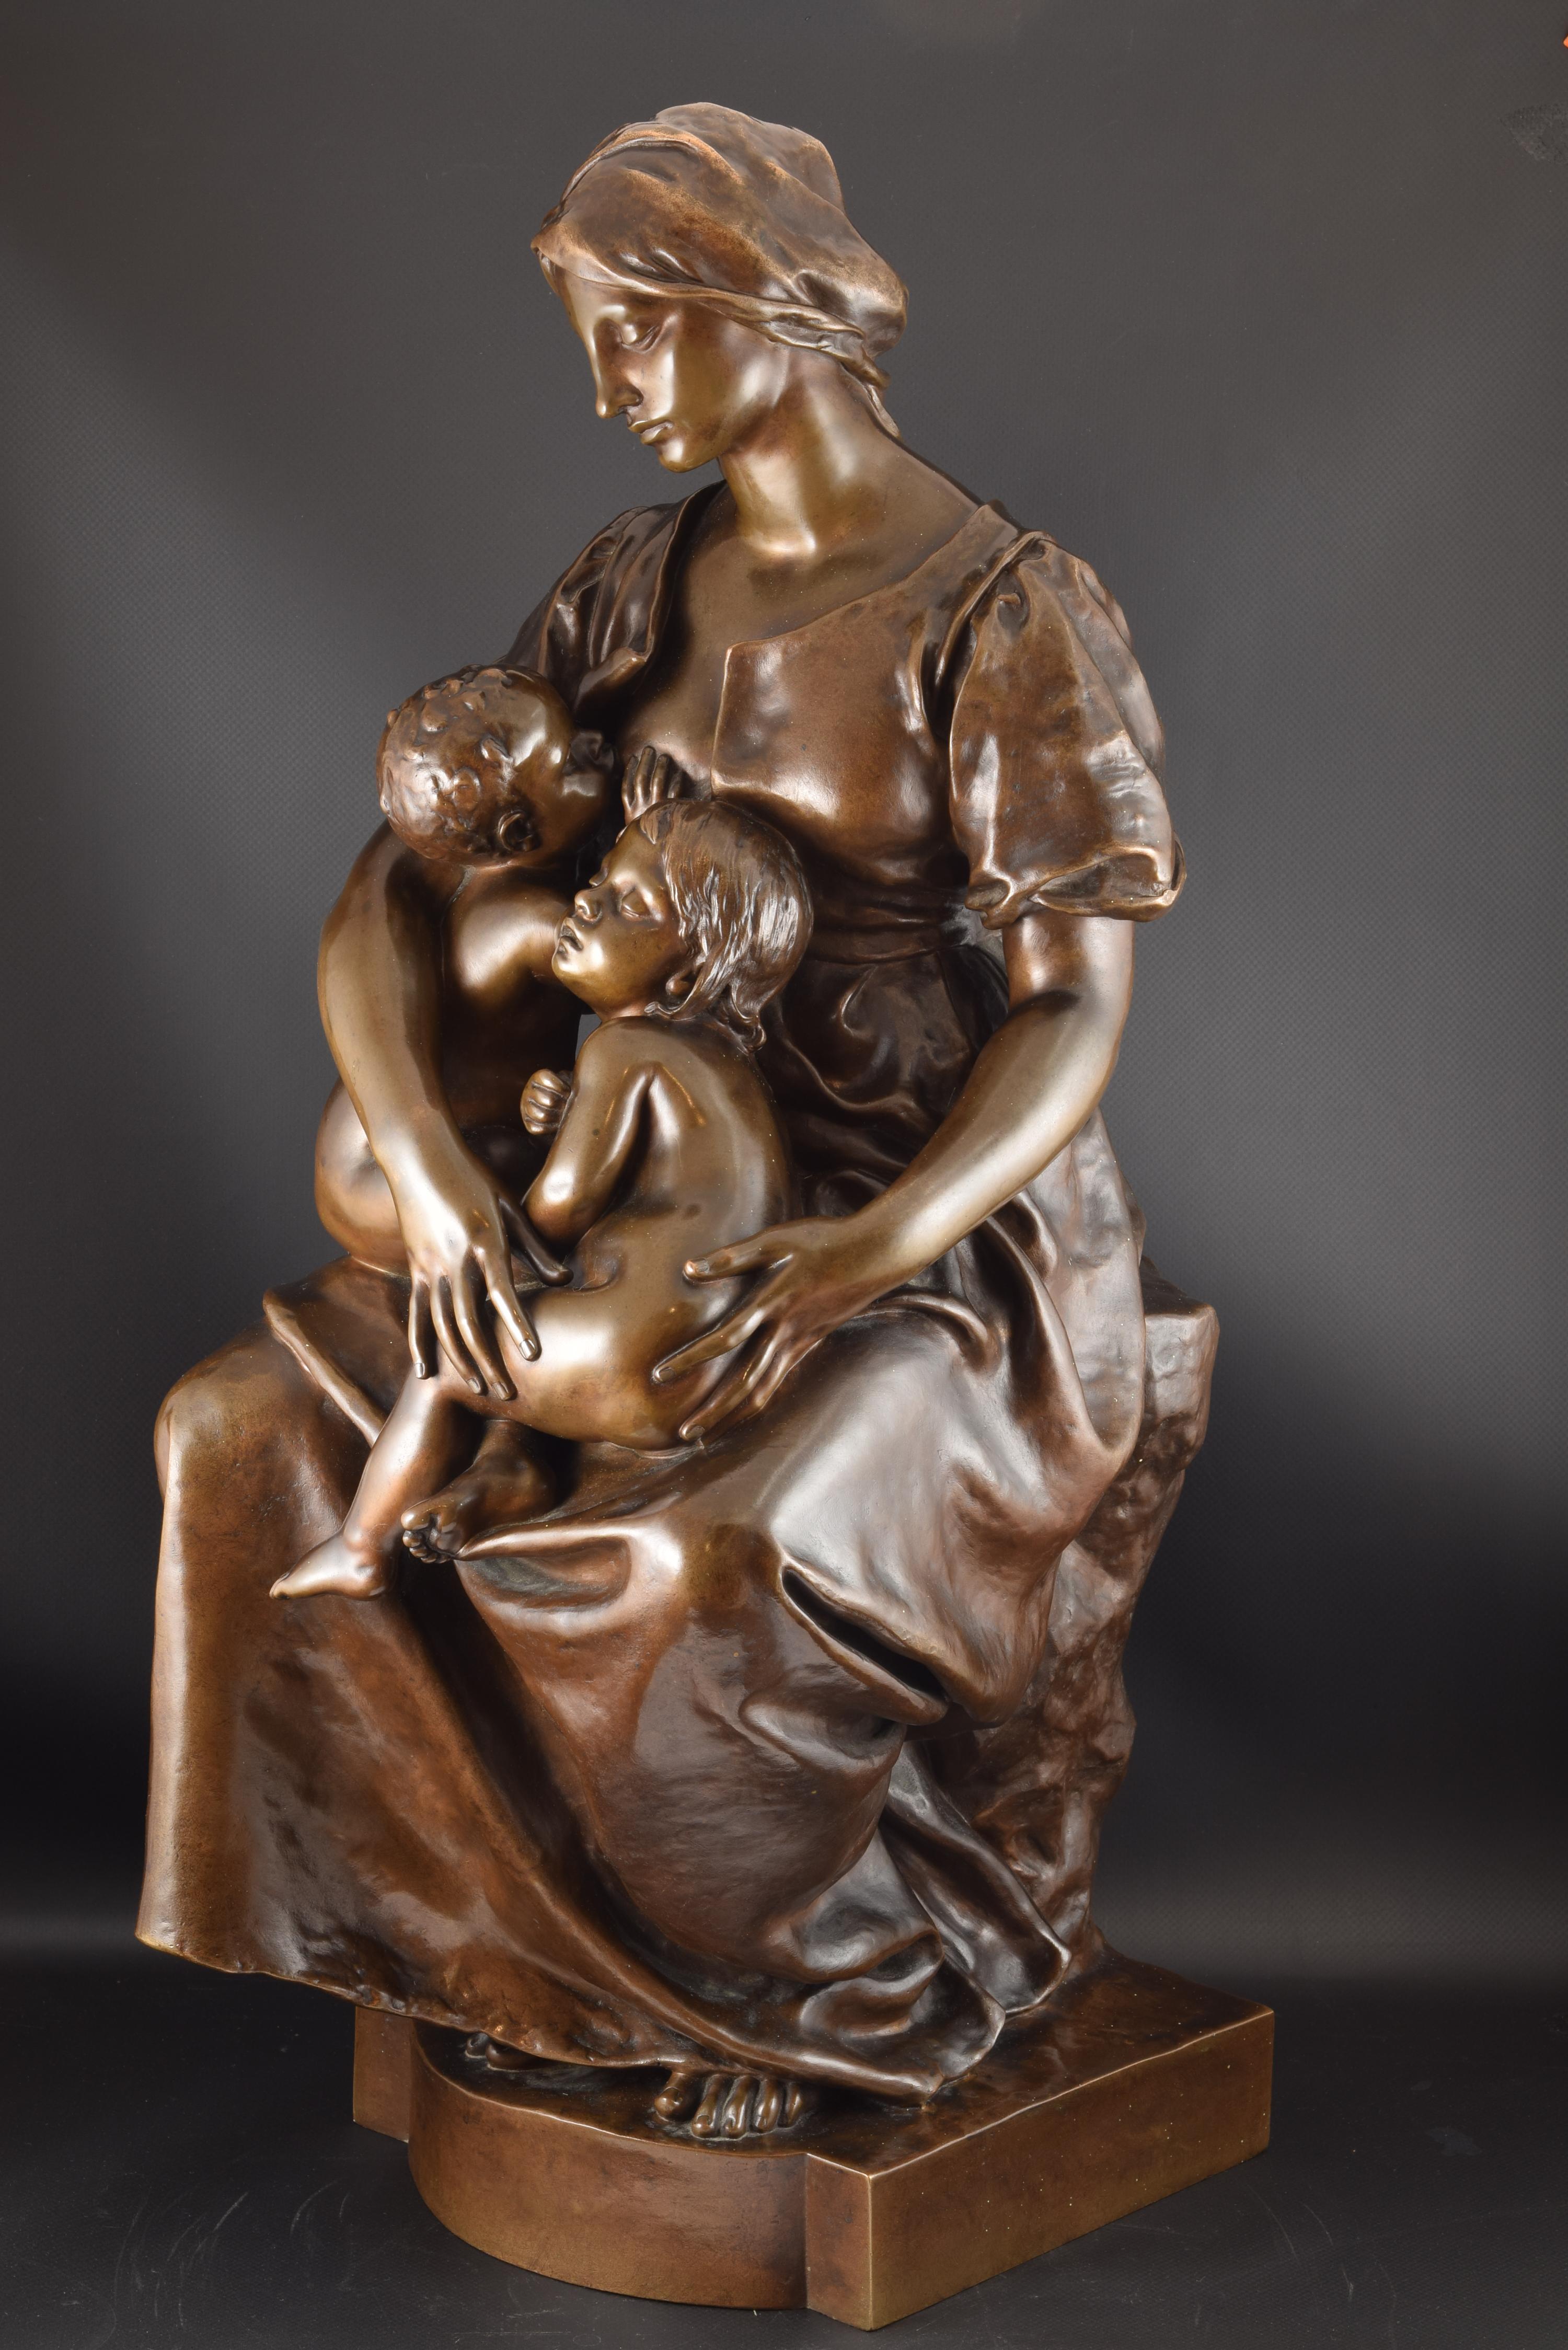 “Charity”, bronze, 19th century French School. Signed Paul Dubois (France, 1829-1905), with founder marks (F. Barbedienne).
Paul Dubois was an artist of received a great recognition in life, especially for his sculptures of small size, so